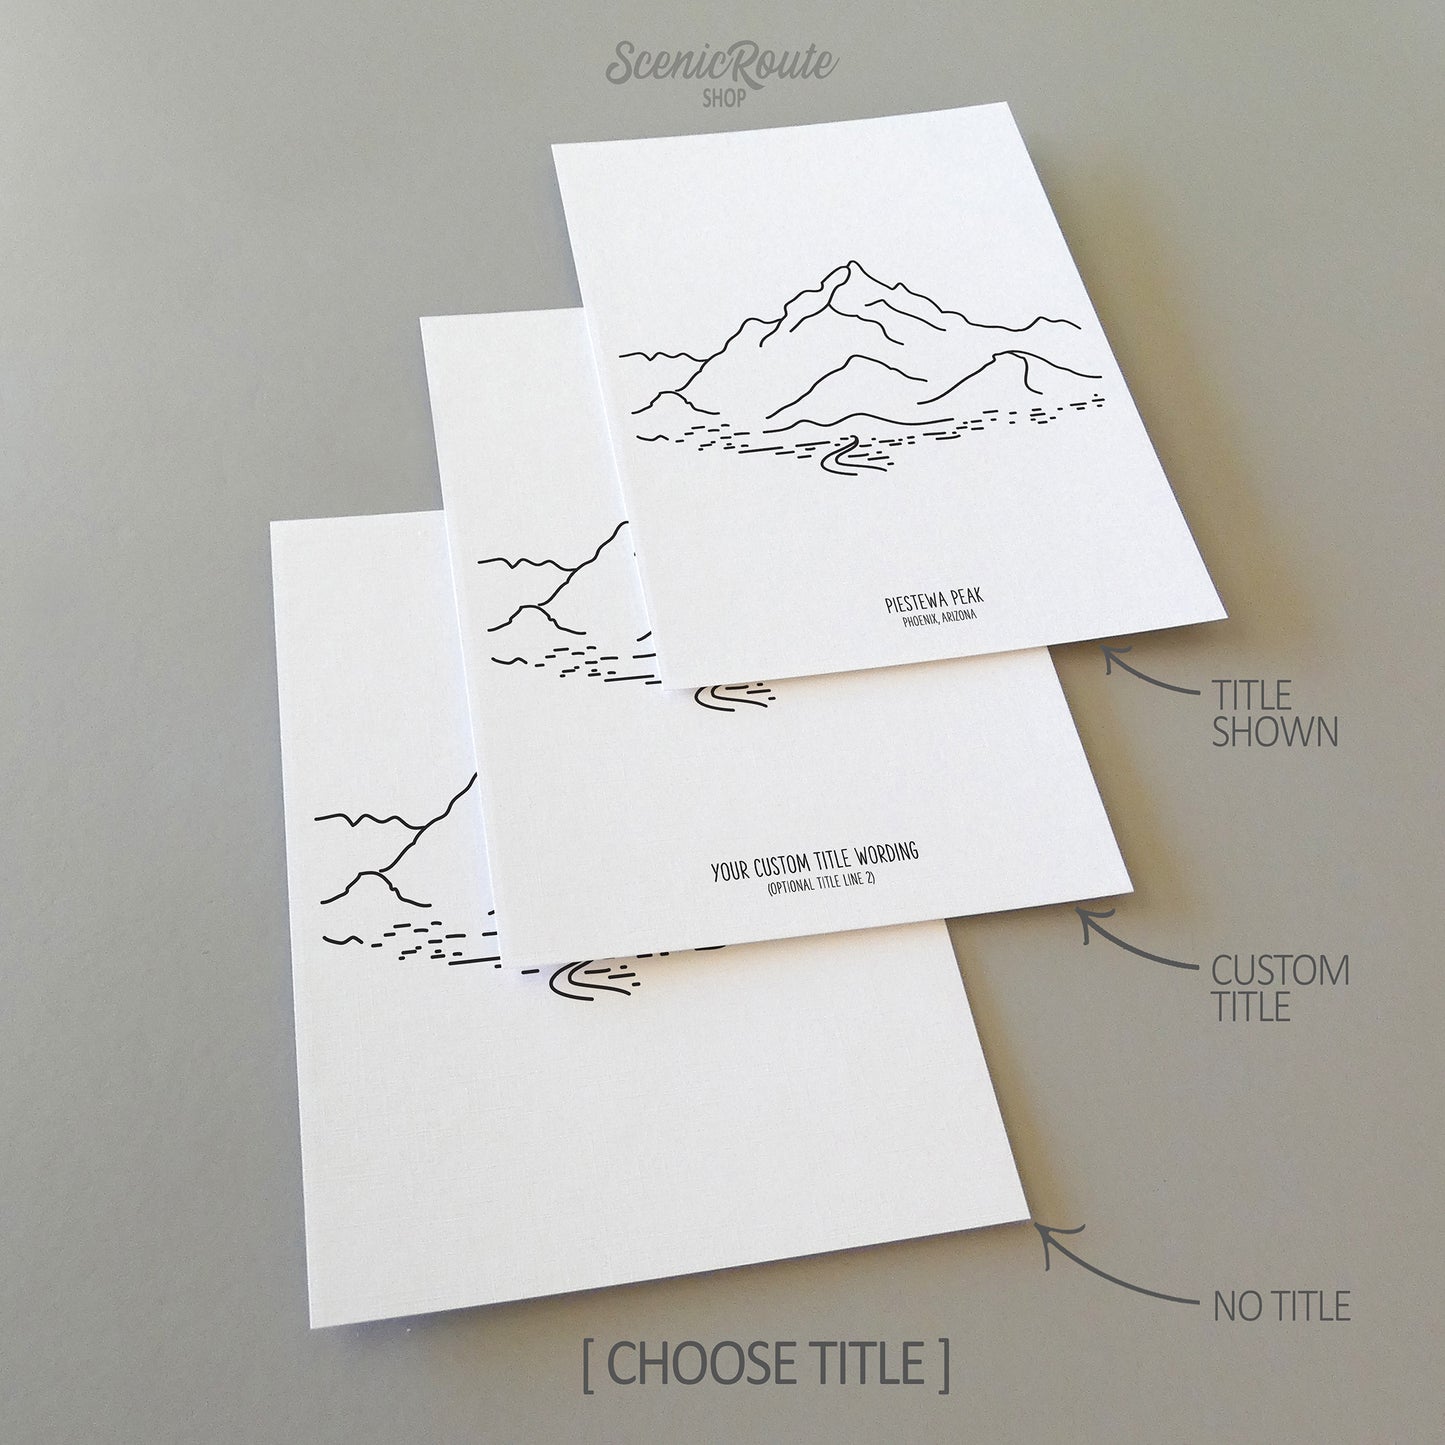 Three line art drawings of Piestewa Peak in Phoenix Arizona on white linen paper with a gray background.  The pieces are shown with title options that can be chosen and personalized.